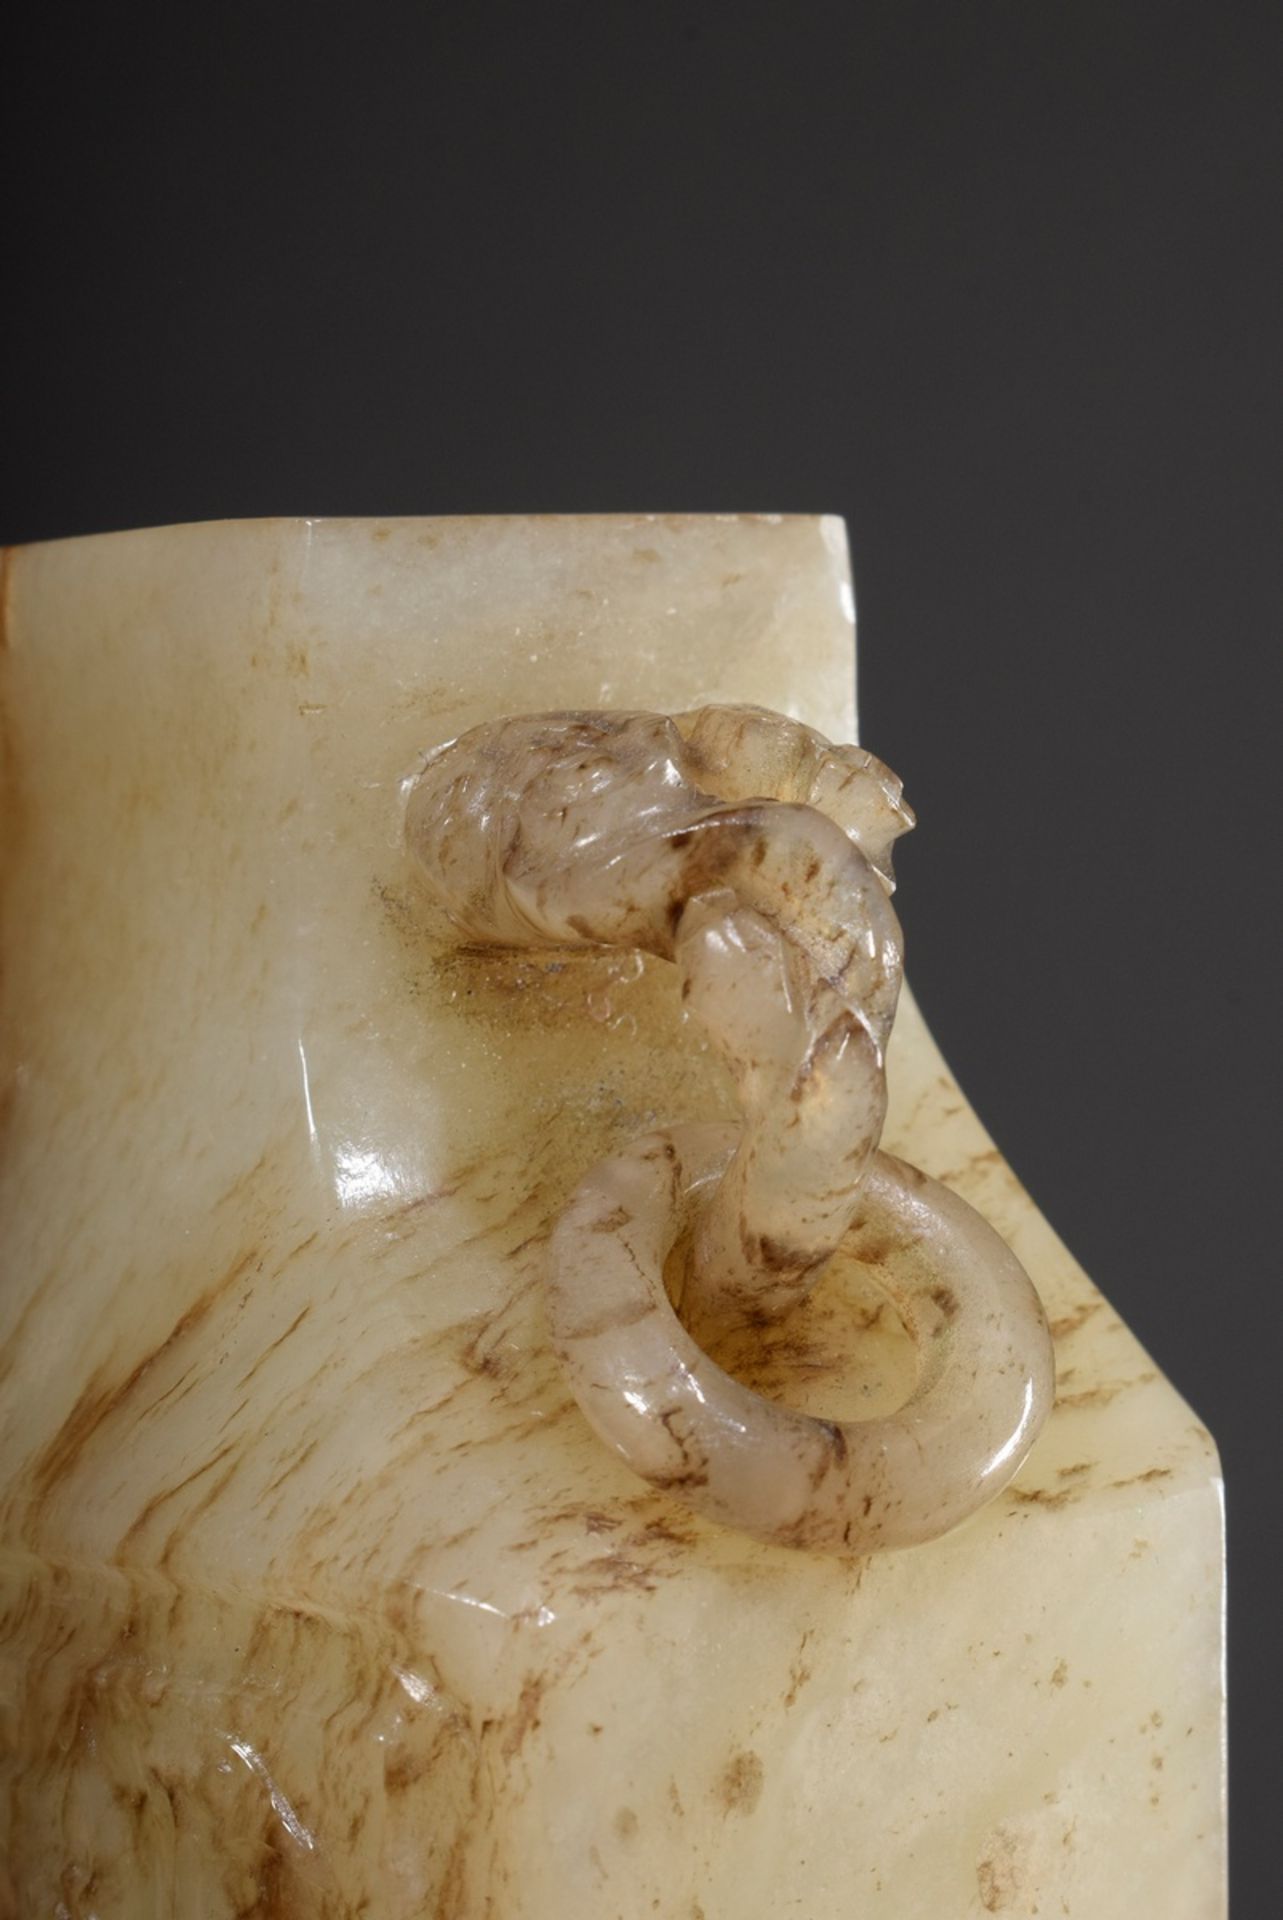 Small jade vase with archaic relief carving "dragon" on an angular body and zoomorphic ring handles - Image 3 of 5